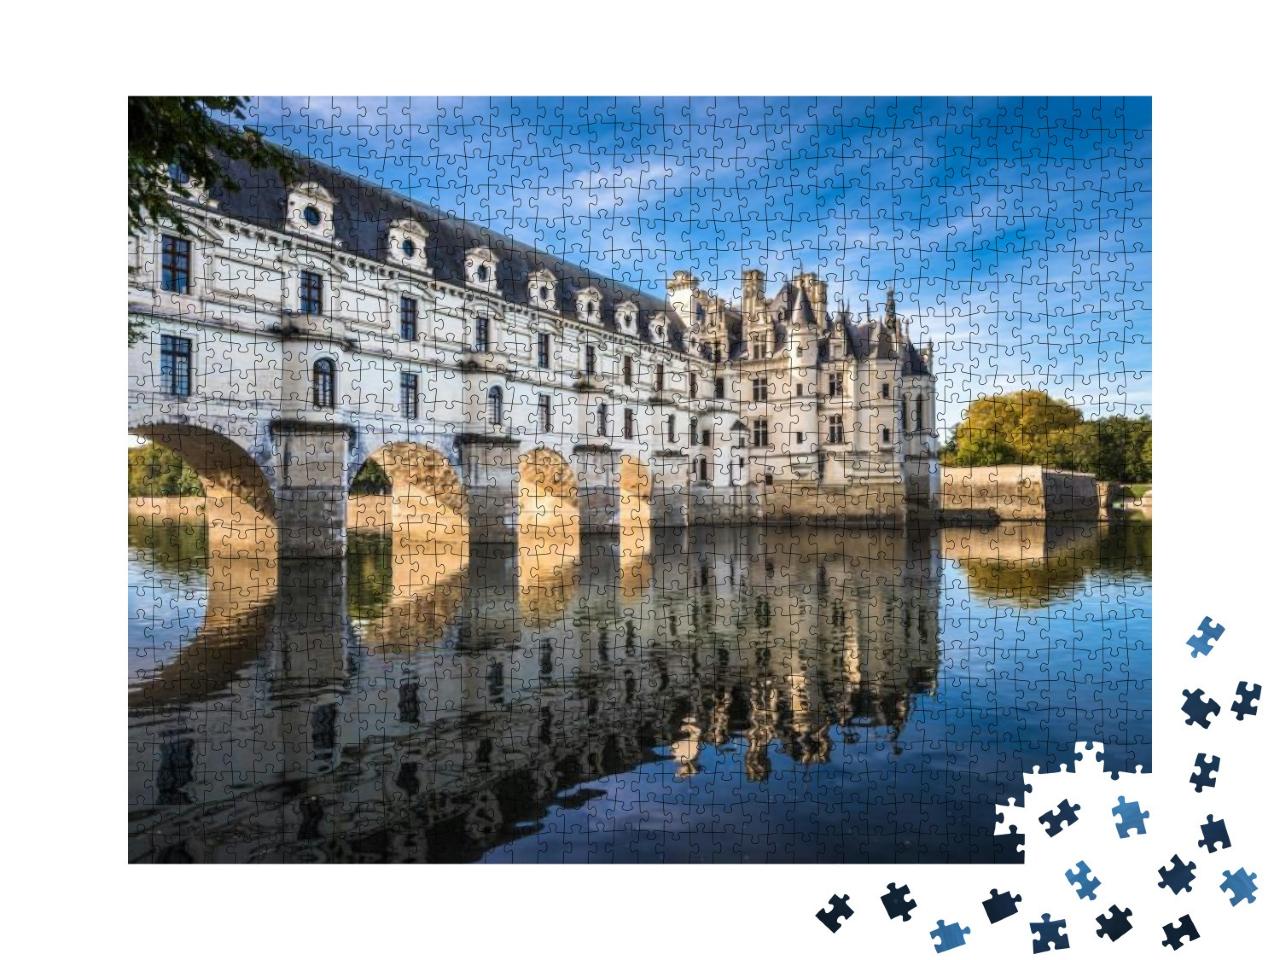 Chateau De Chenonceau on the Cher River, Loire Valley, Fr... Jigsaw Puzzle with 1000 pieces